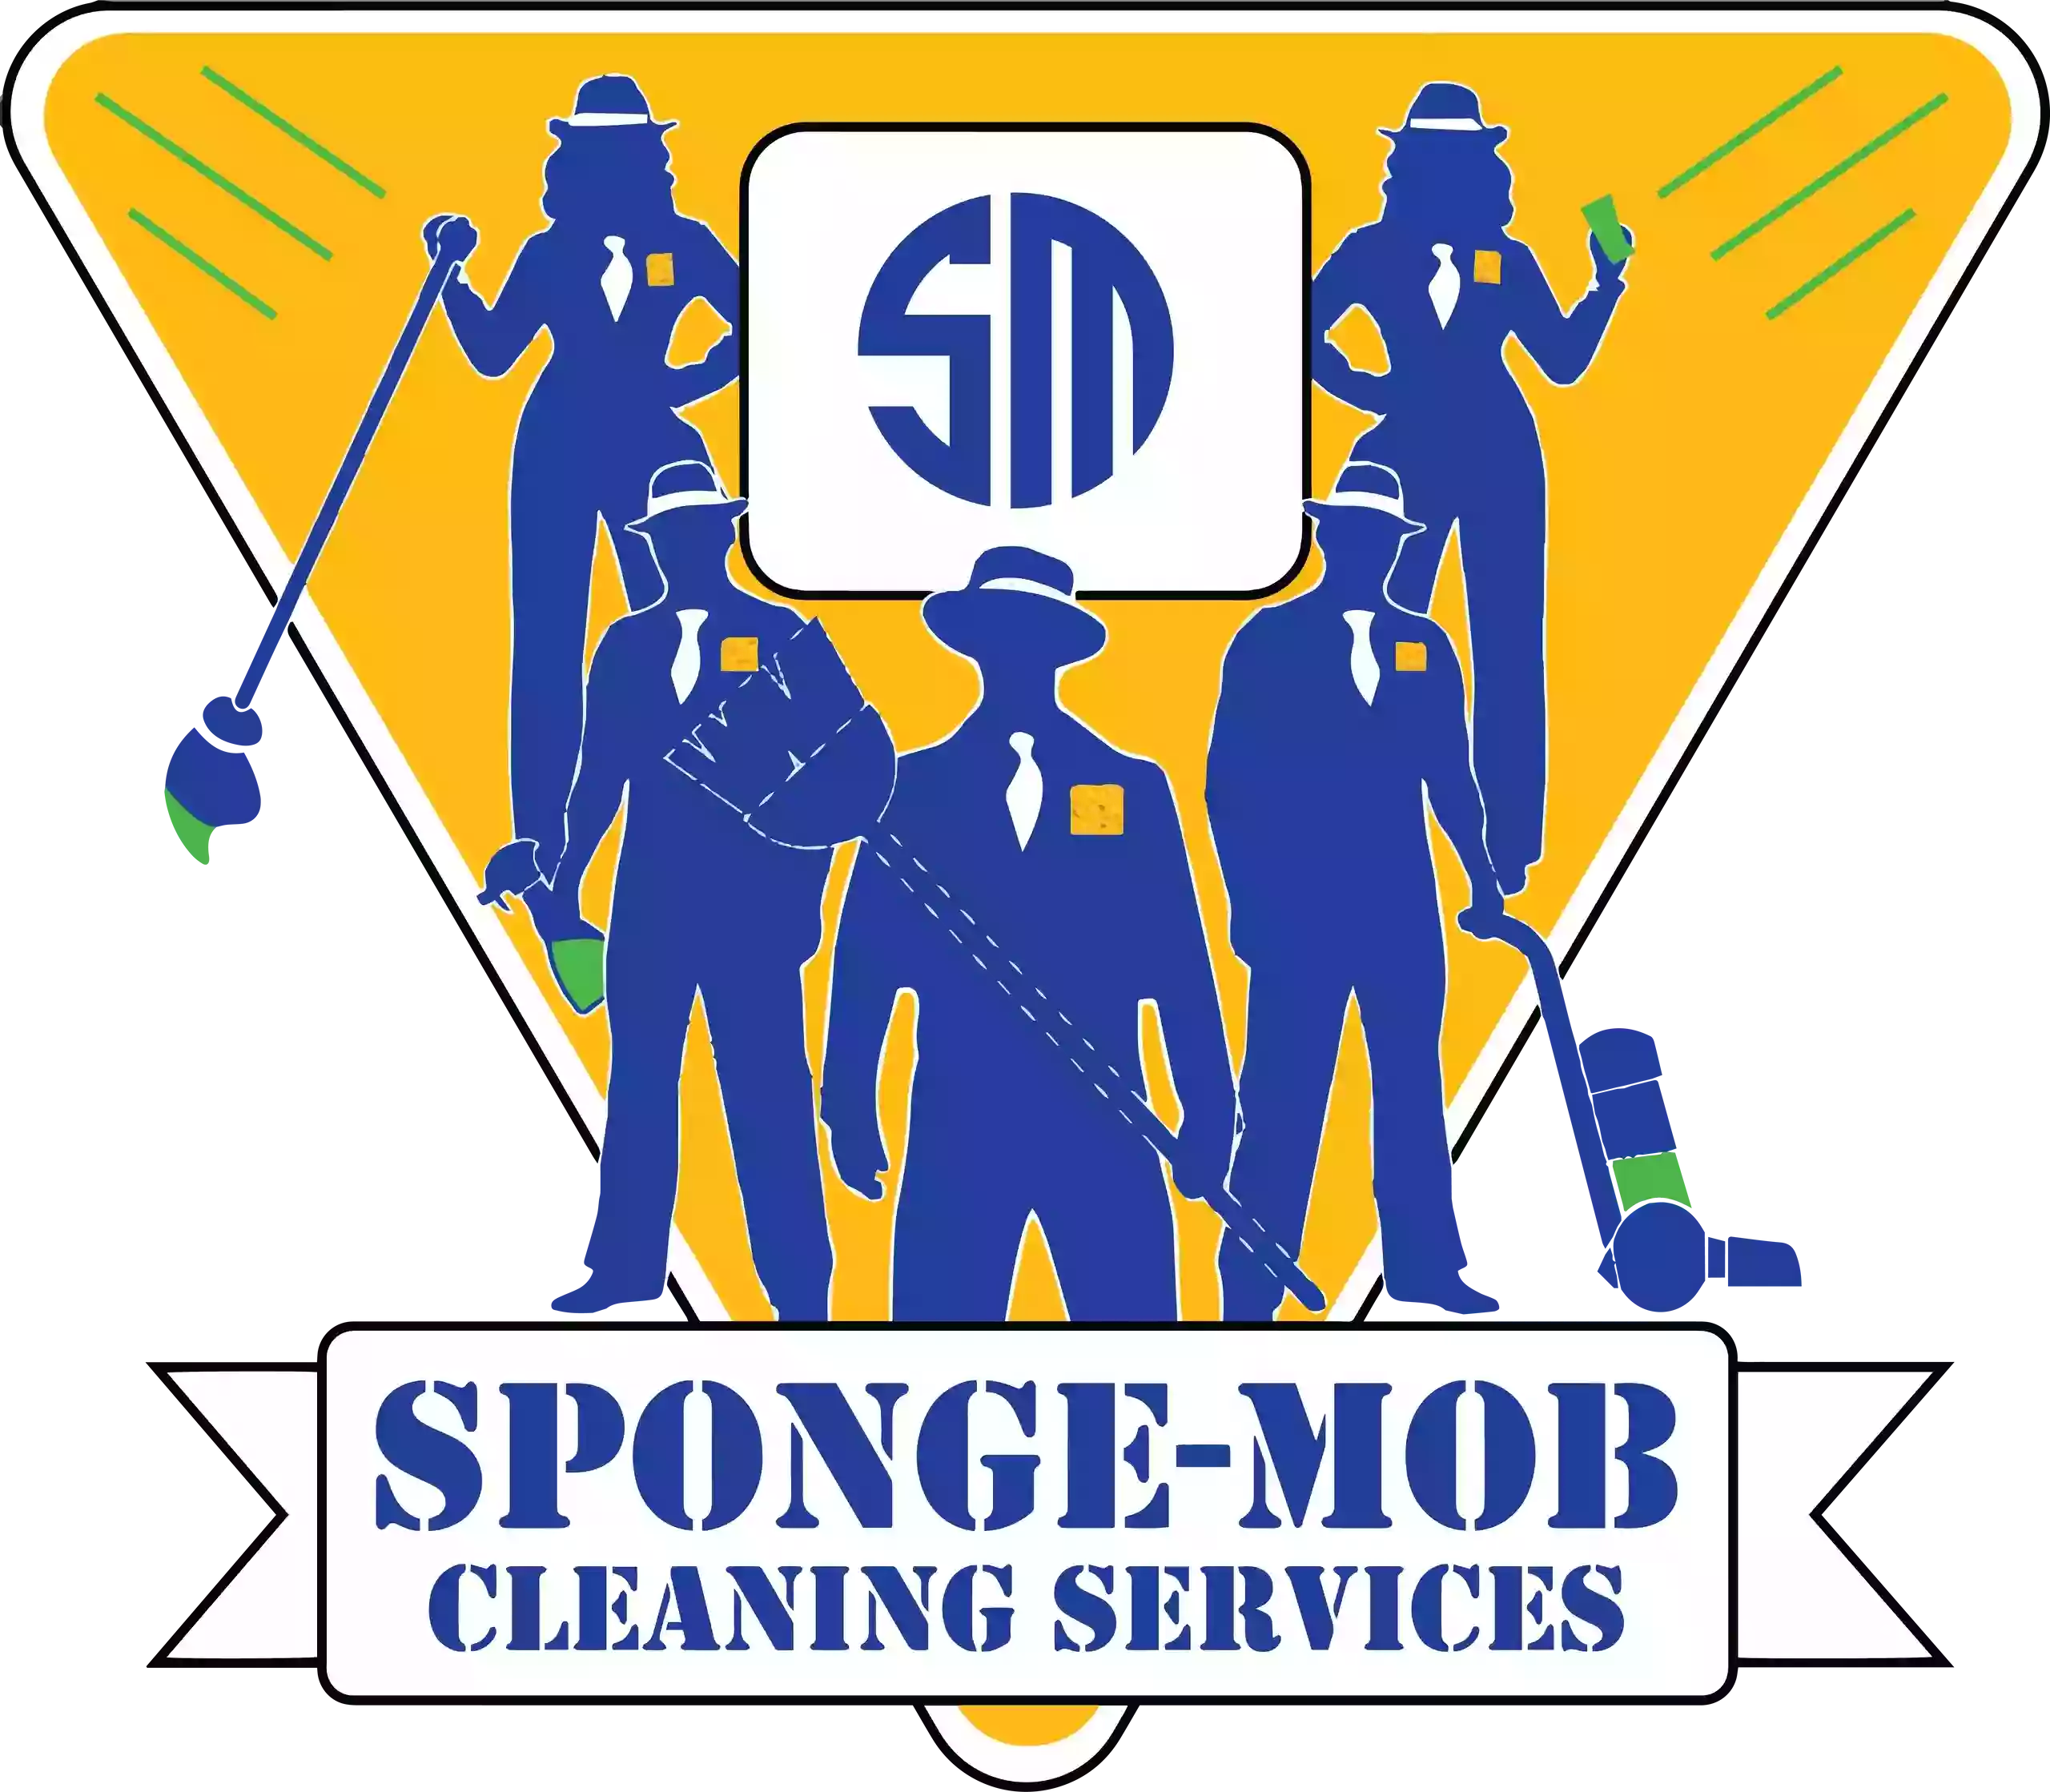 Sponge-Mob Cleaning Services North